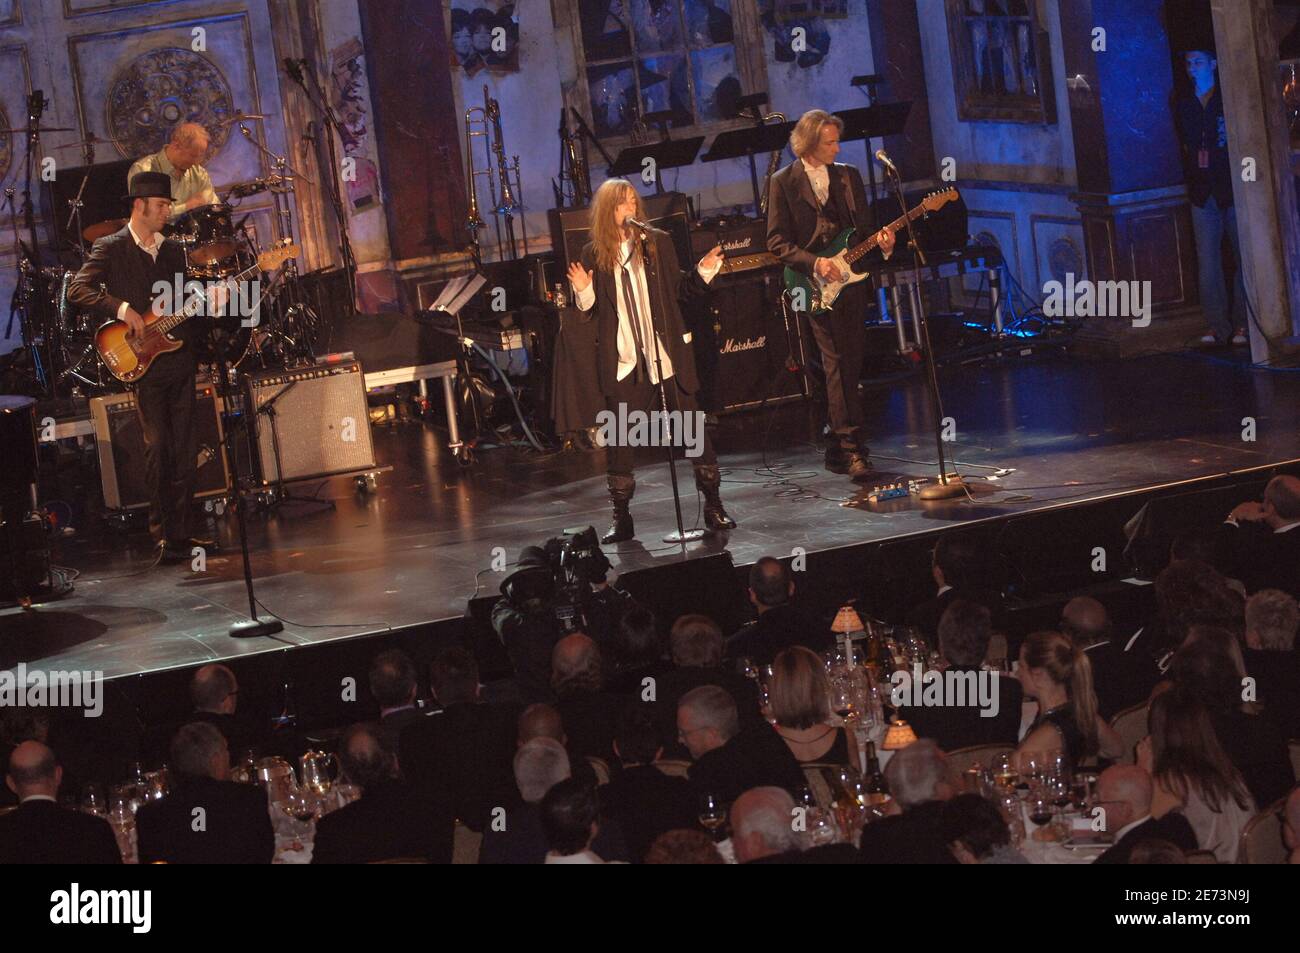 Inductee Patti Smith performs onstage at the 22nd annual Rock And Roll Hall of Fame Induction Ceremony held at the Waldorf Astoria Hotel in New York City, NY, USA on March 12, 2007. Photo by Gregorio Binuya/ABACAPRESS.COM Stock Photo